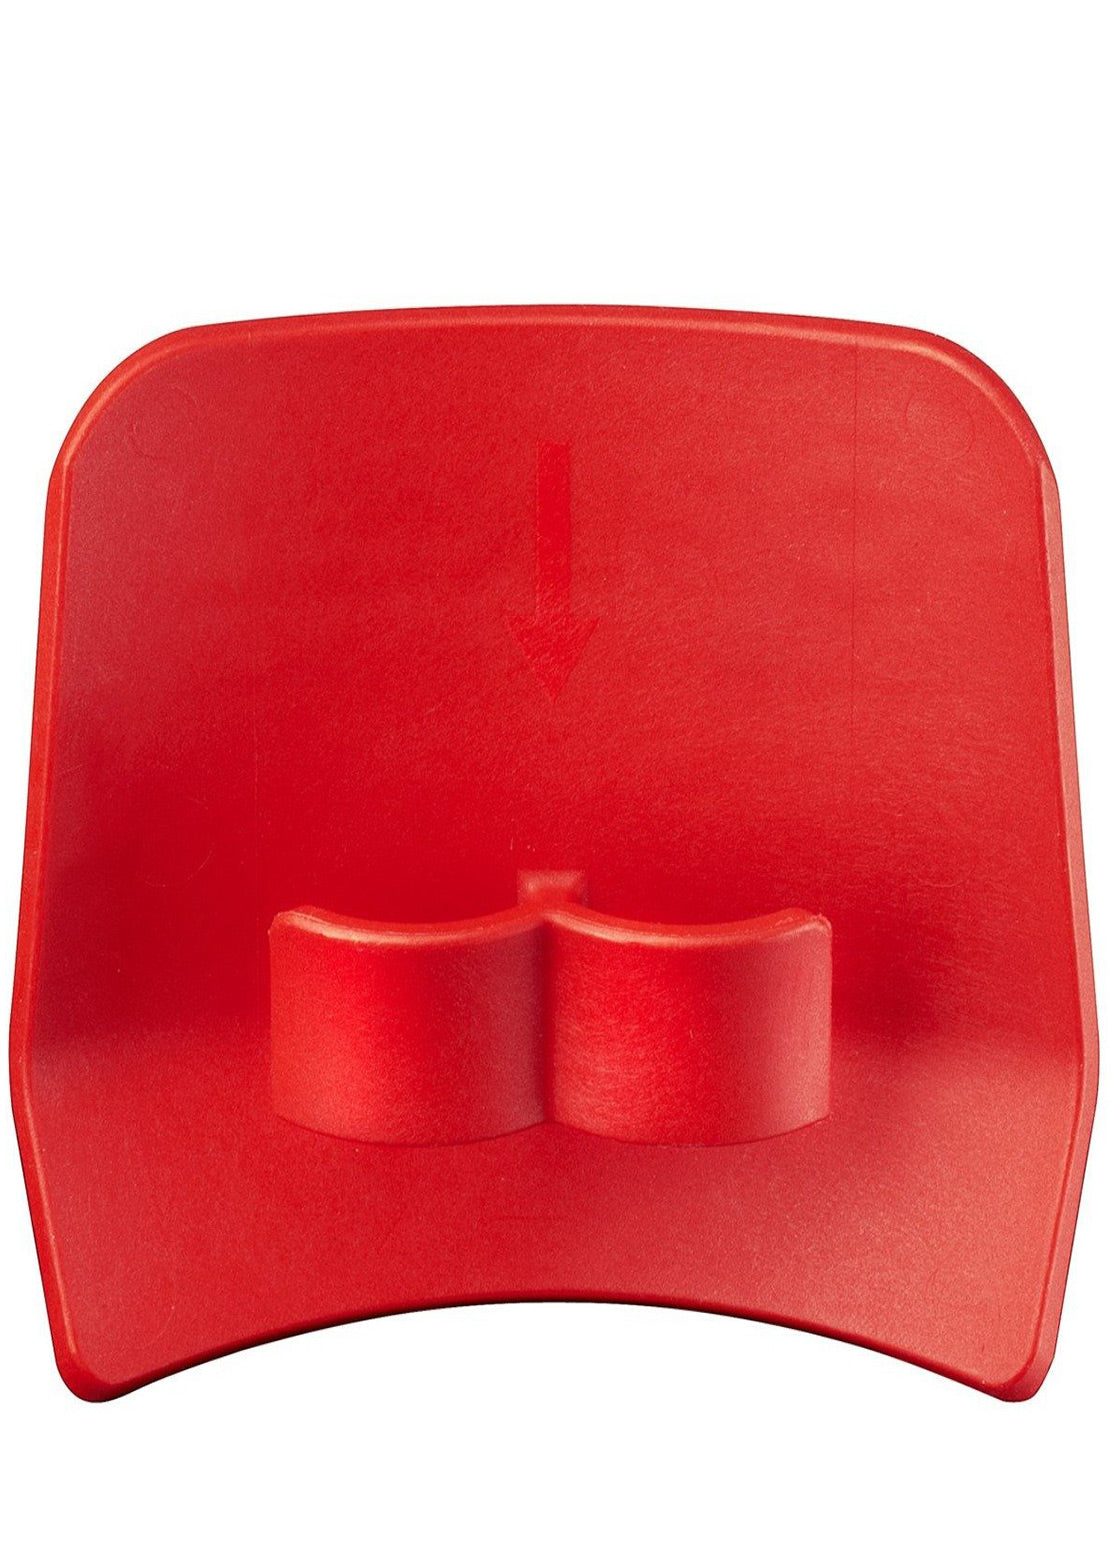 Opinel Junior Le Petit Chef Finger Guard Red